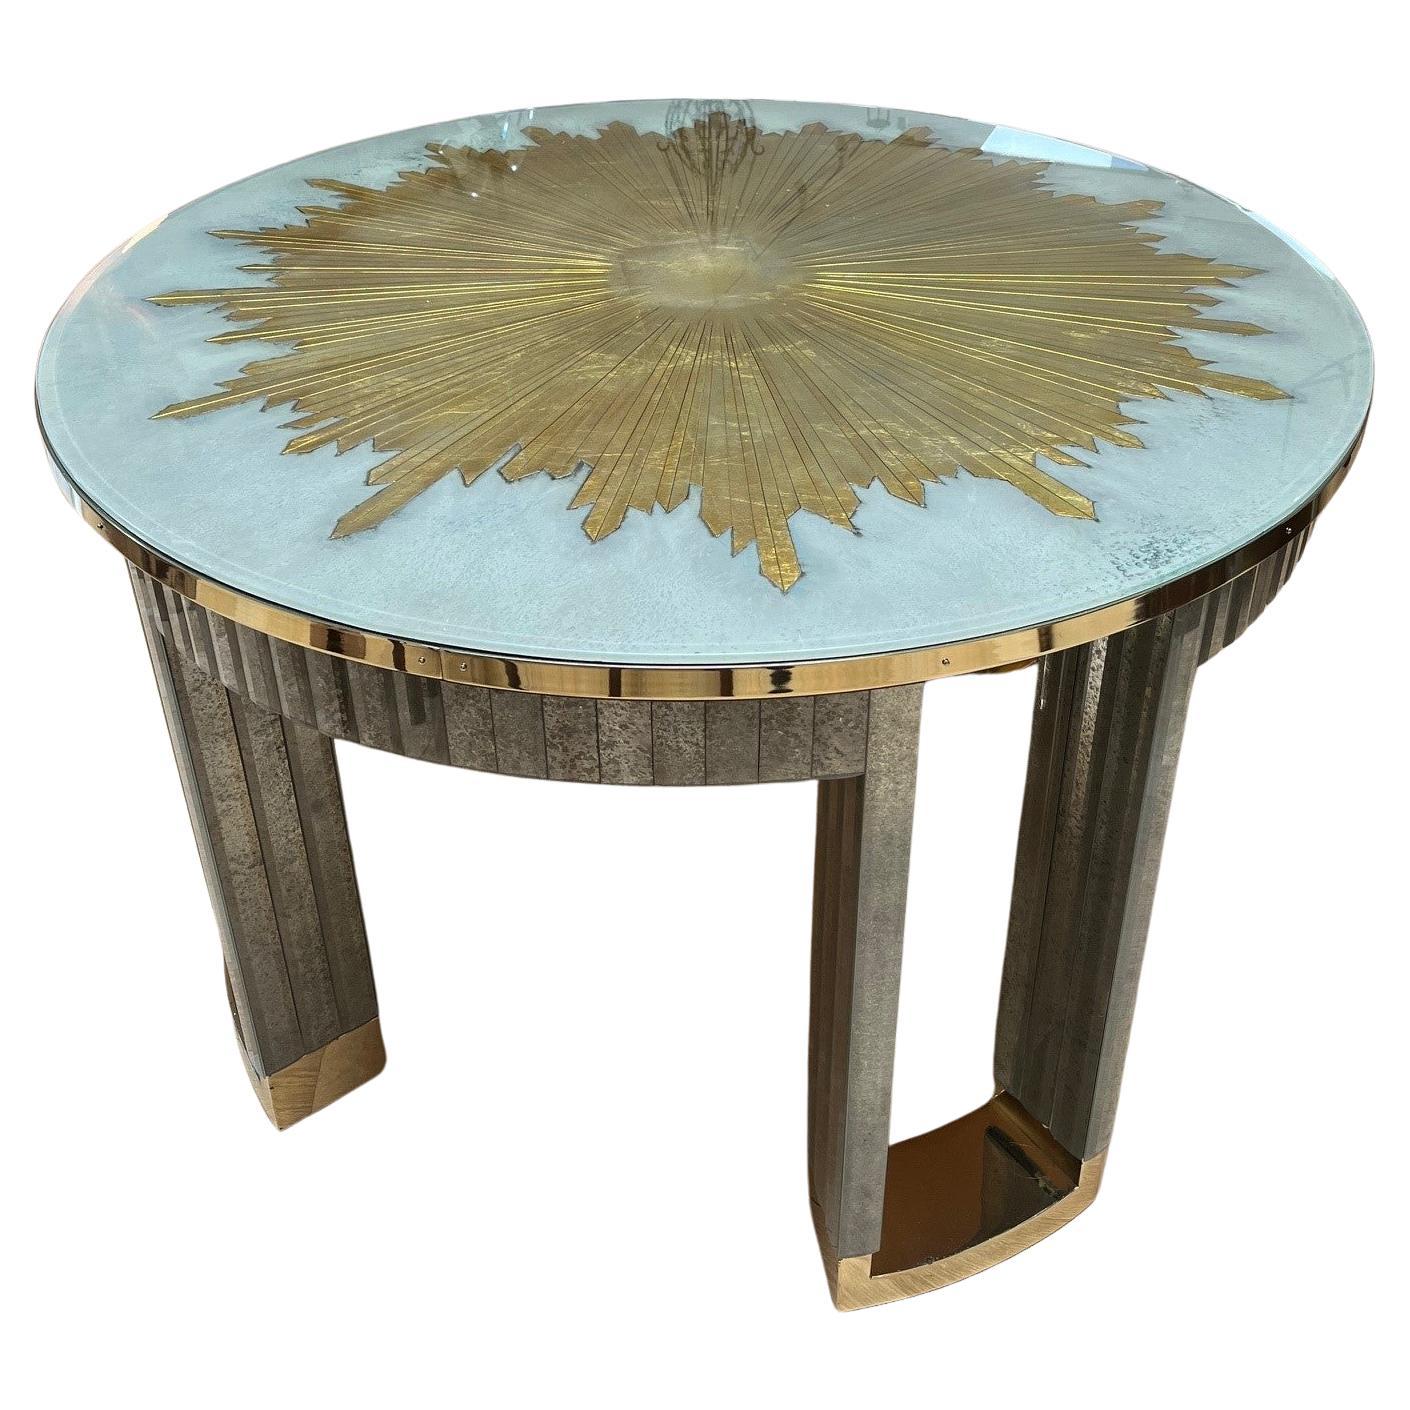 Made to Order Mirrored Helena Center Table with Etched and Gilded Starburst For Sale